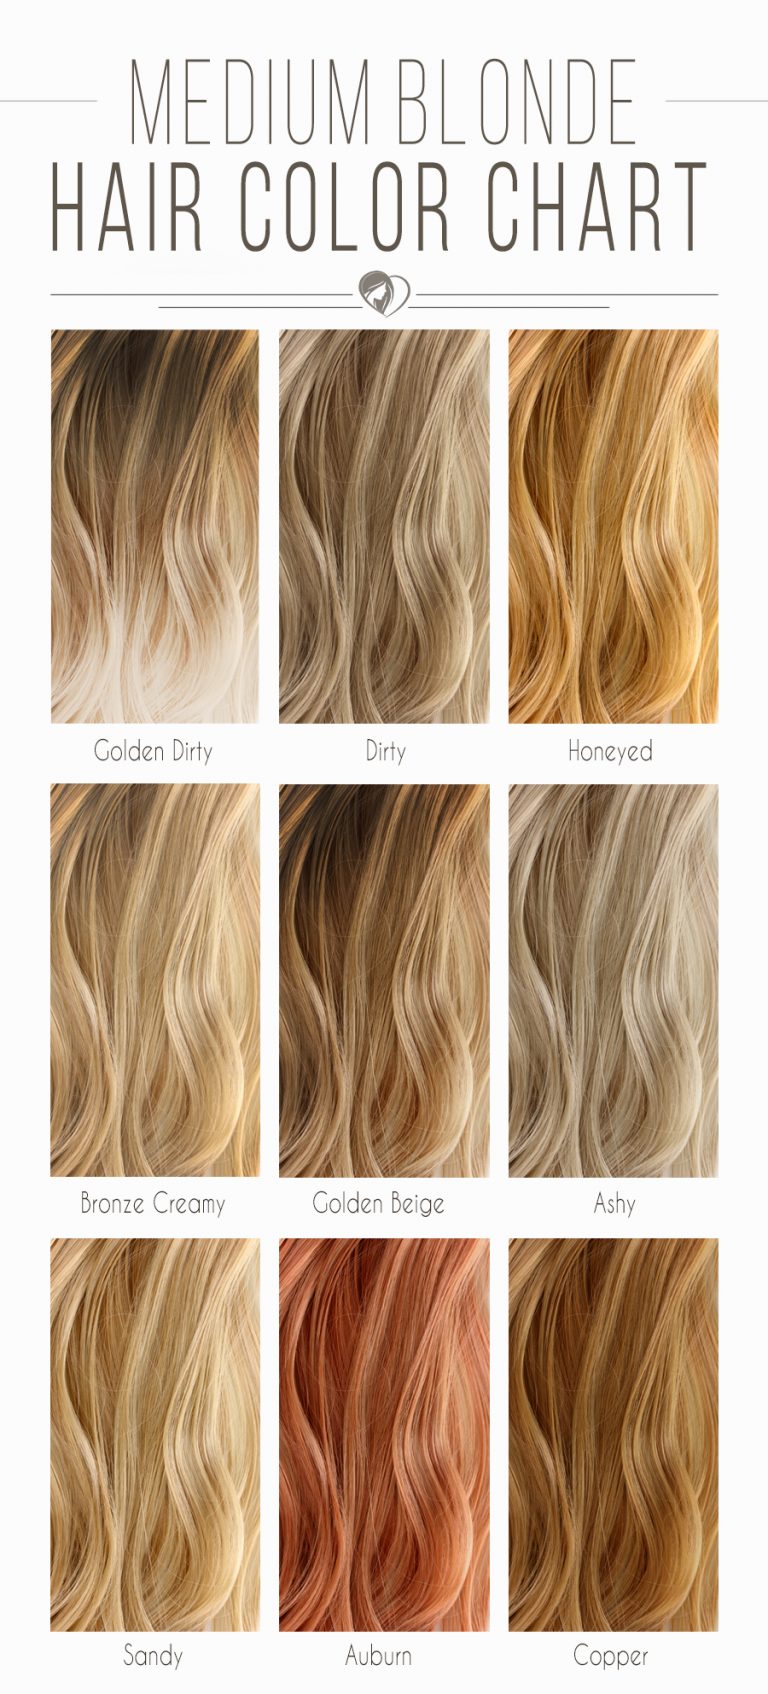 BLONDE HAIR COLOR CHART: THE SHADES KISSED BY THE SUN | Hera Hair Beauty